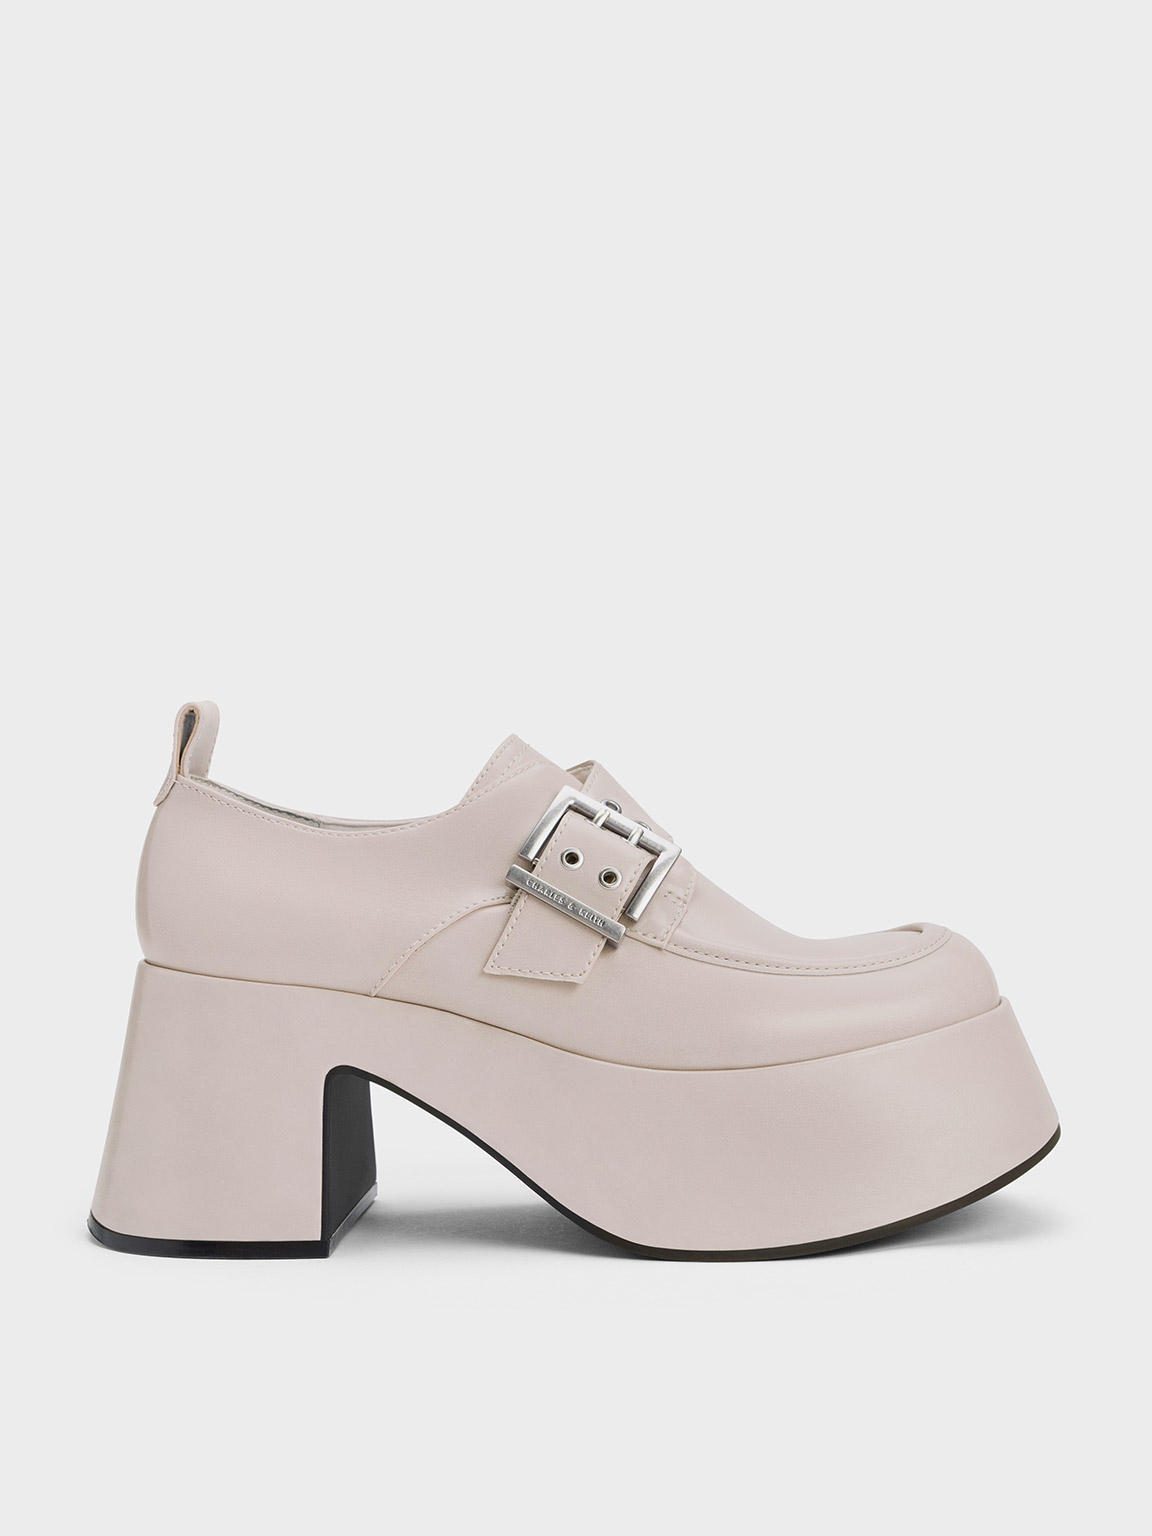 Charles & Keith Rubina Buckled Chunky Loafers In Light Grey